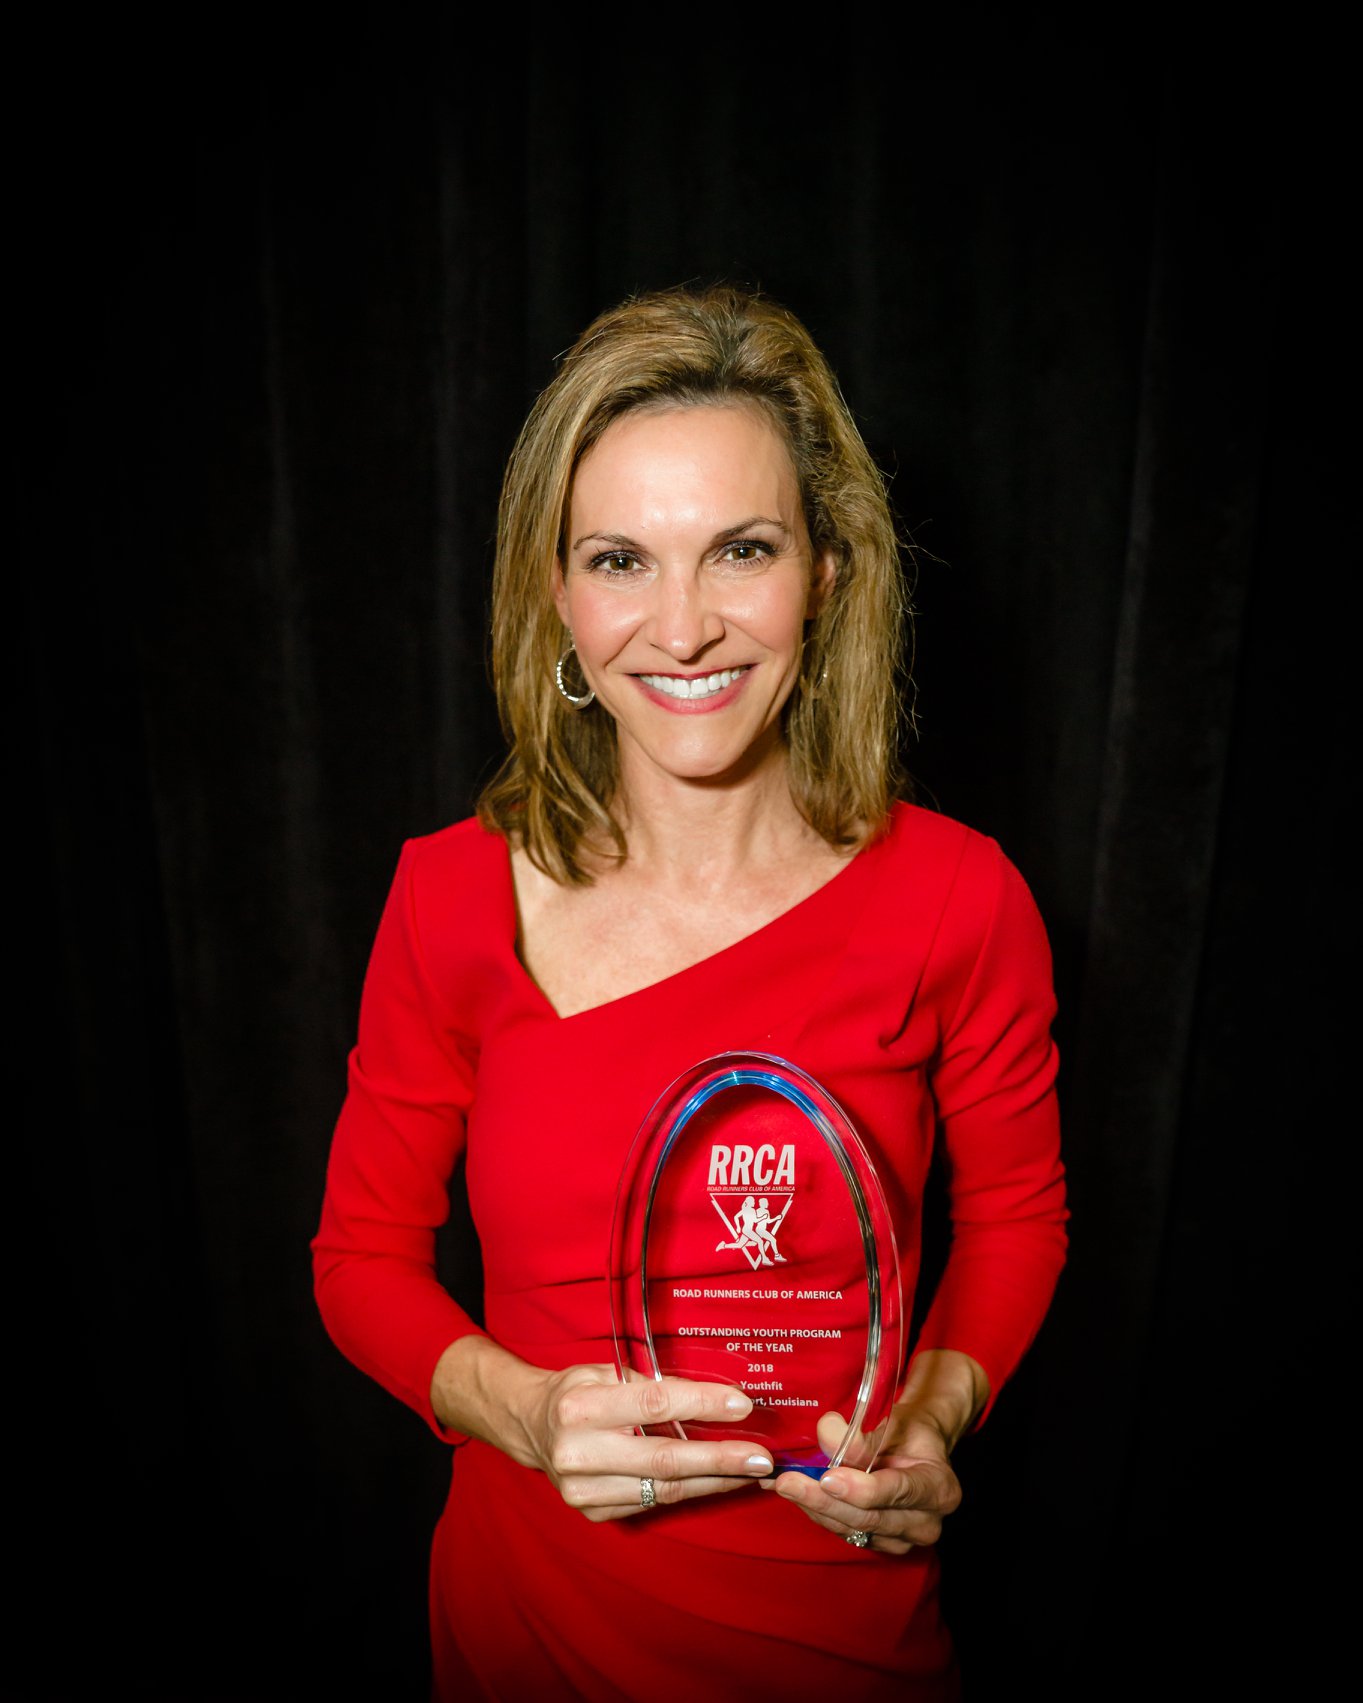 Walden University’s Dr. Shelley Armstrong Receives Outstanding Youth Program Award from Road Runners Club of America